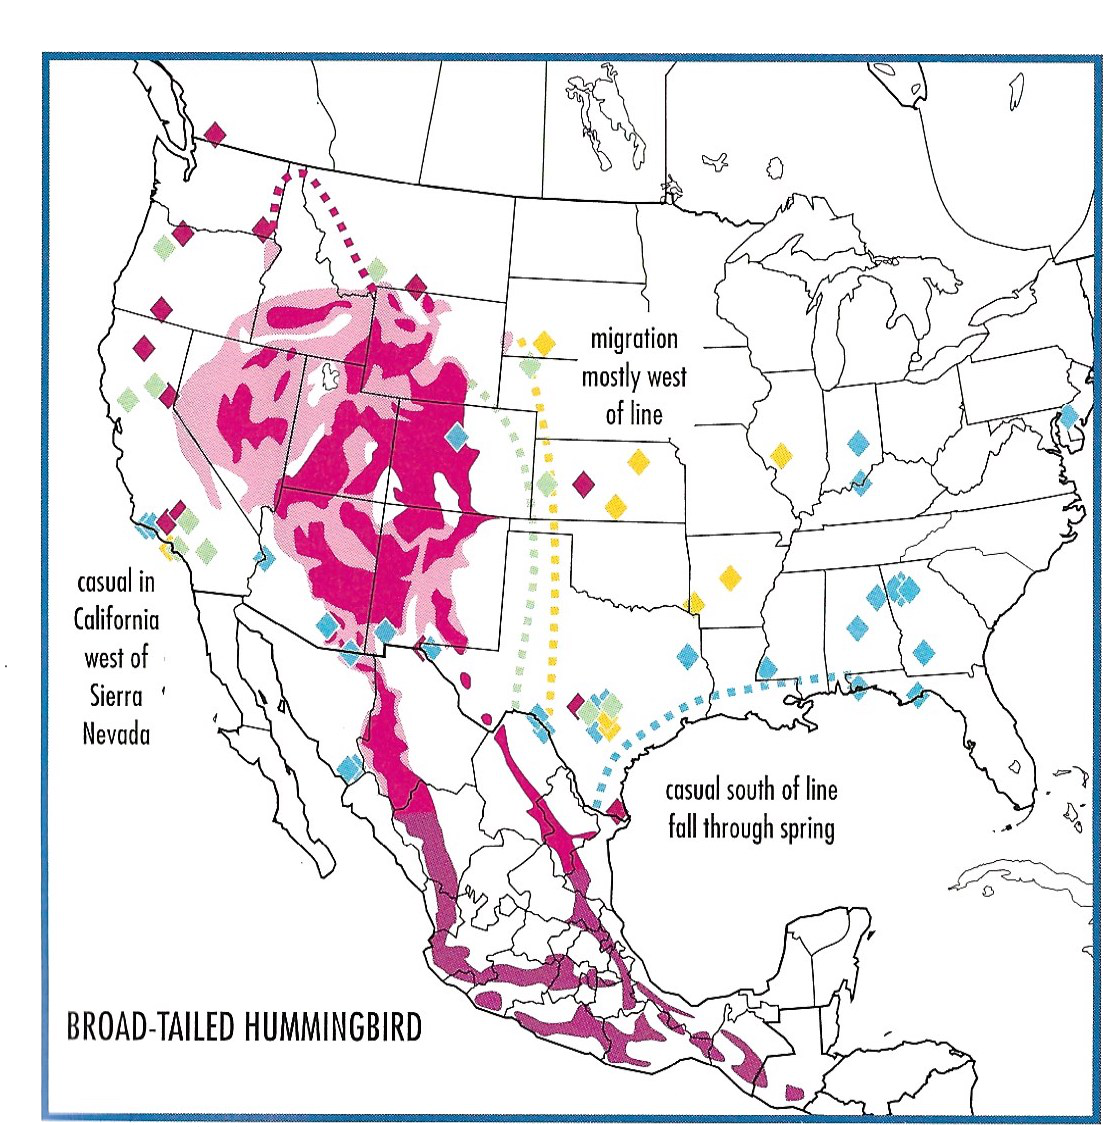 broad-tailed hummingbird migration and range map